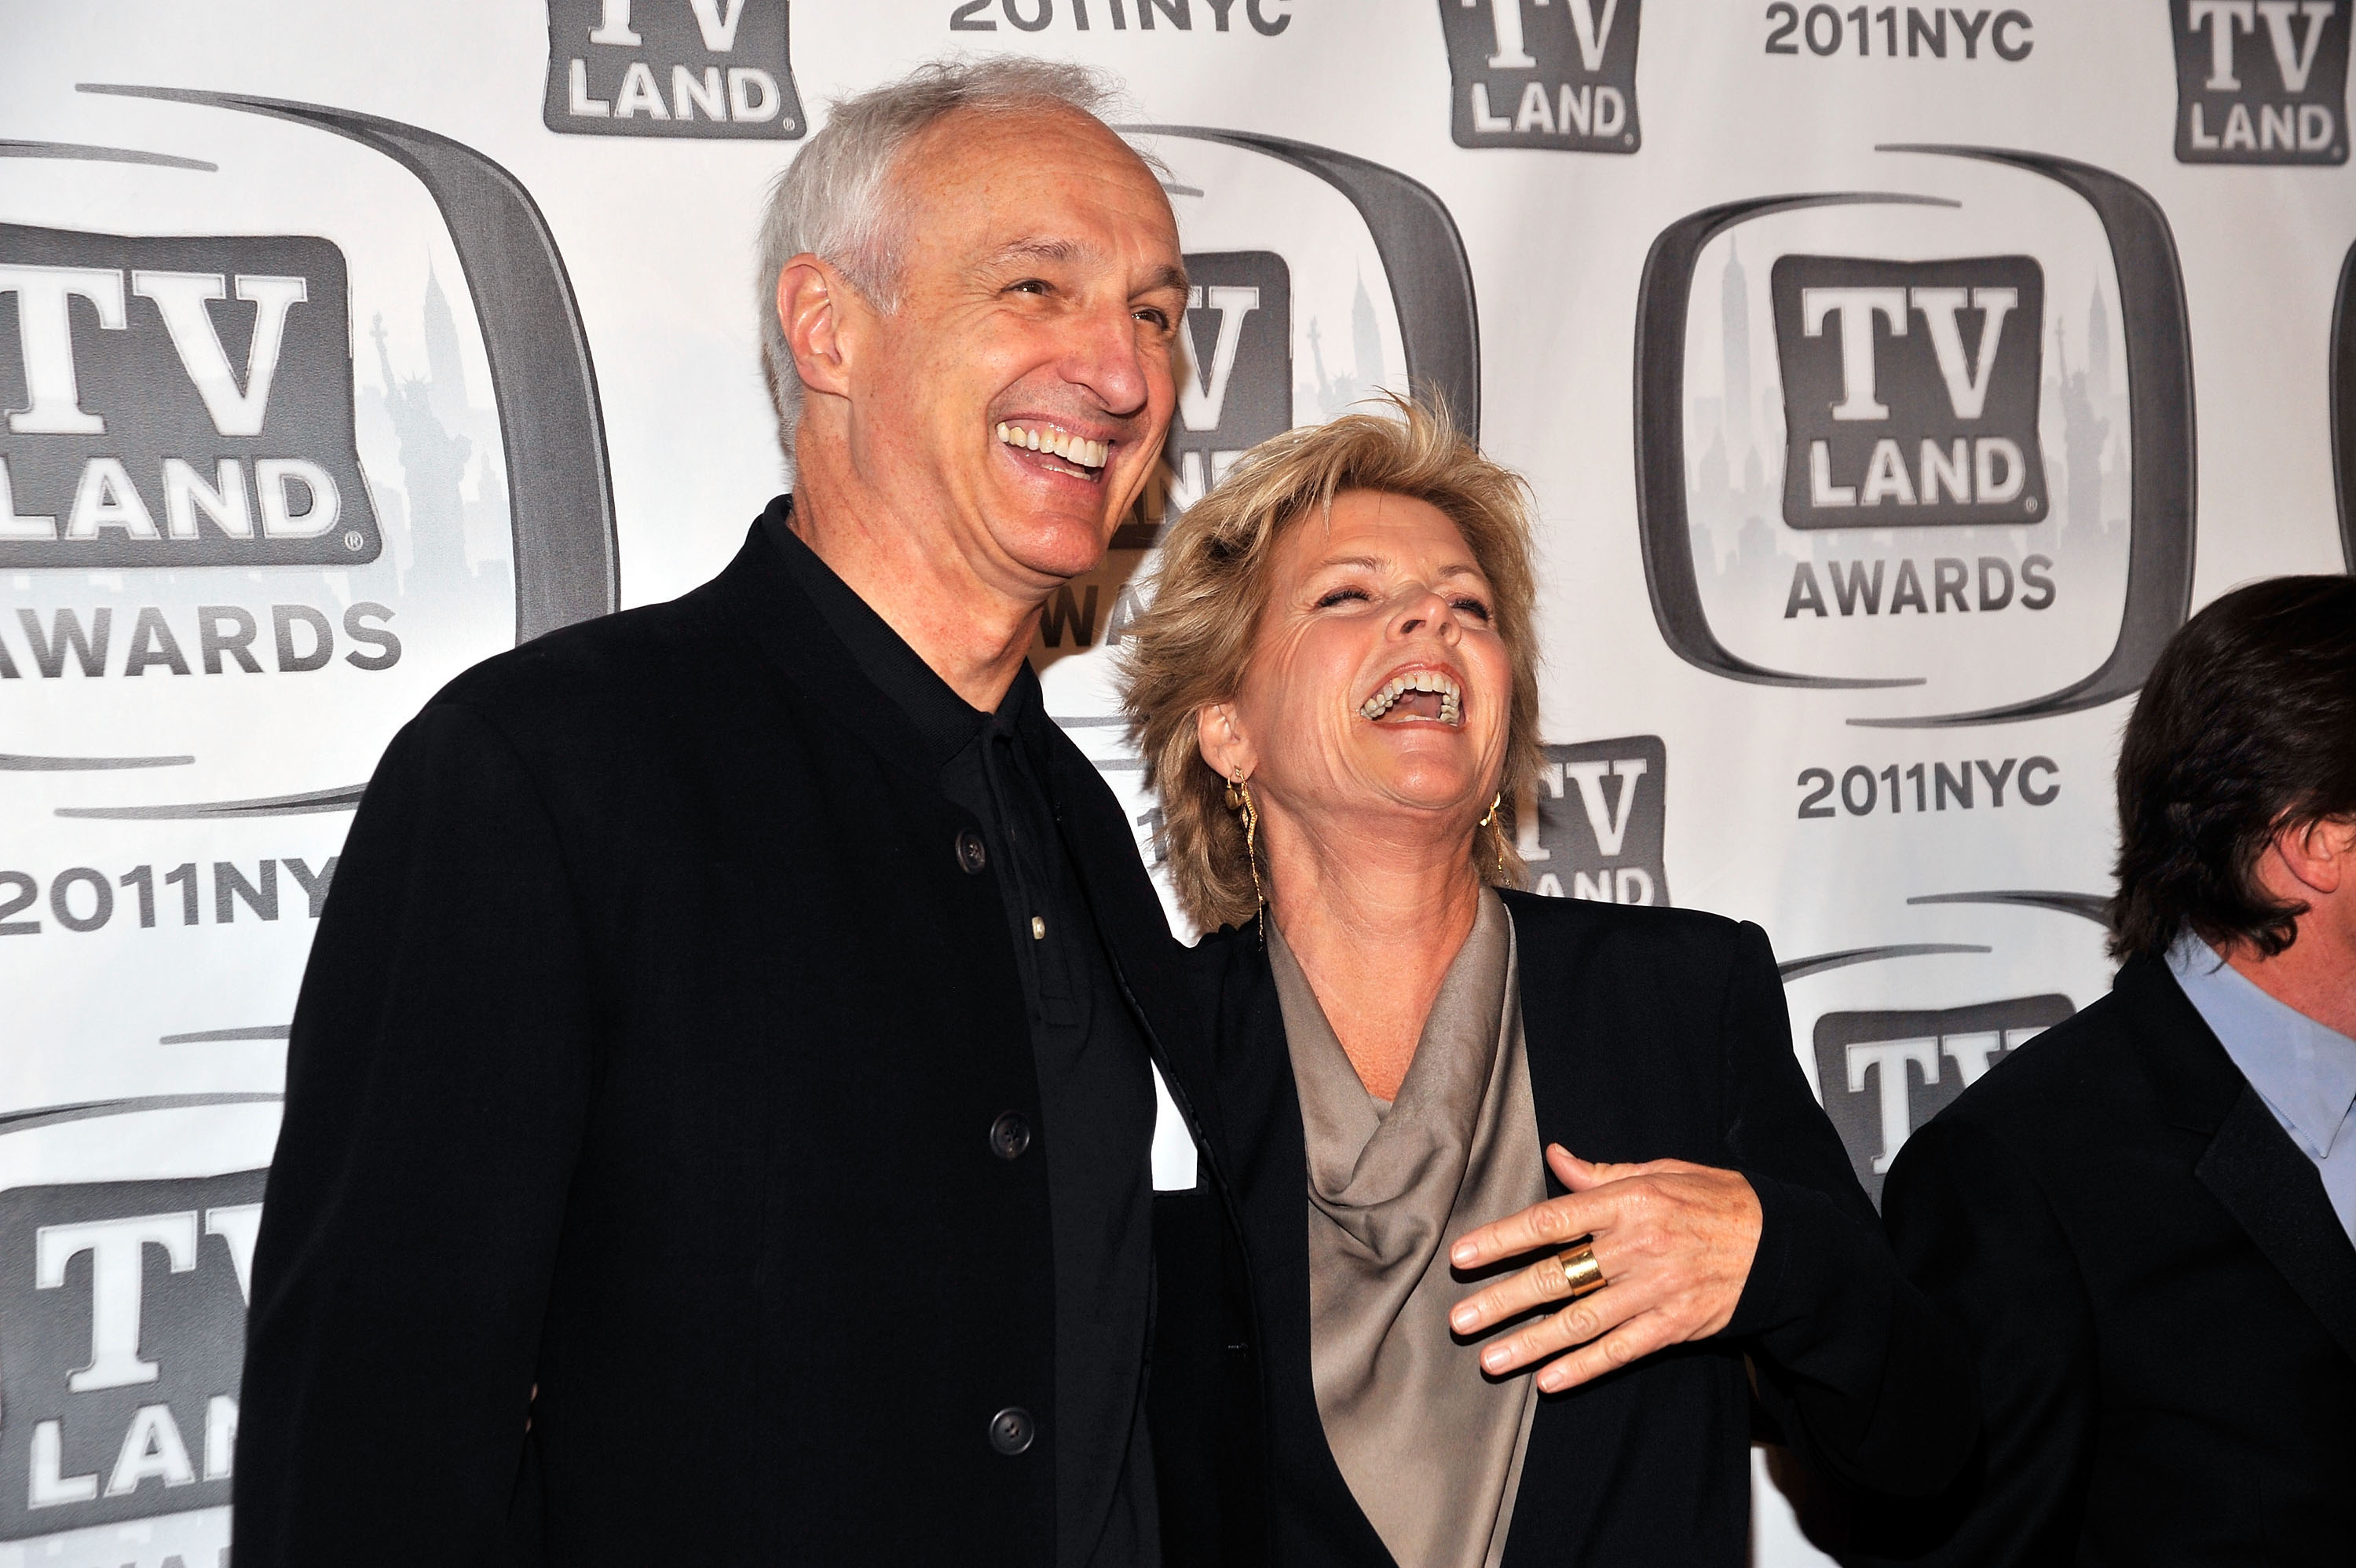 Michael Gross (L) and Meredith Baxter attend the 9th Annual TV Land Awards at the Javits Center on April 10, 2011 in New York City. | Source: Getty Images